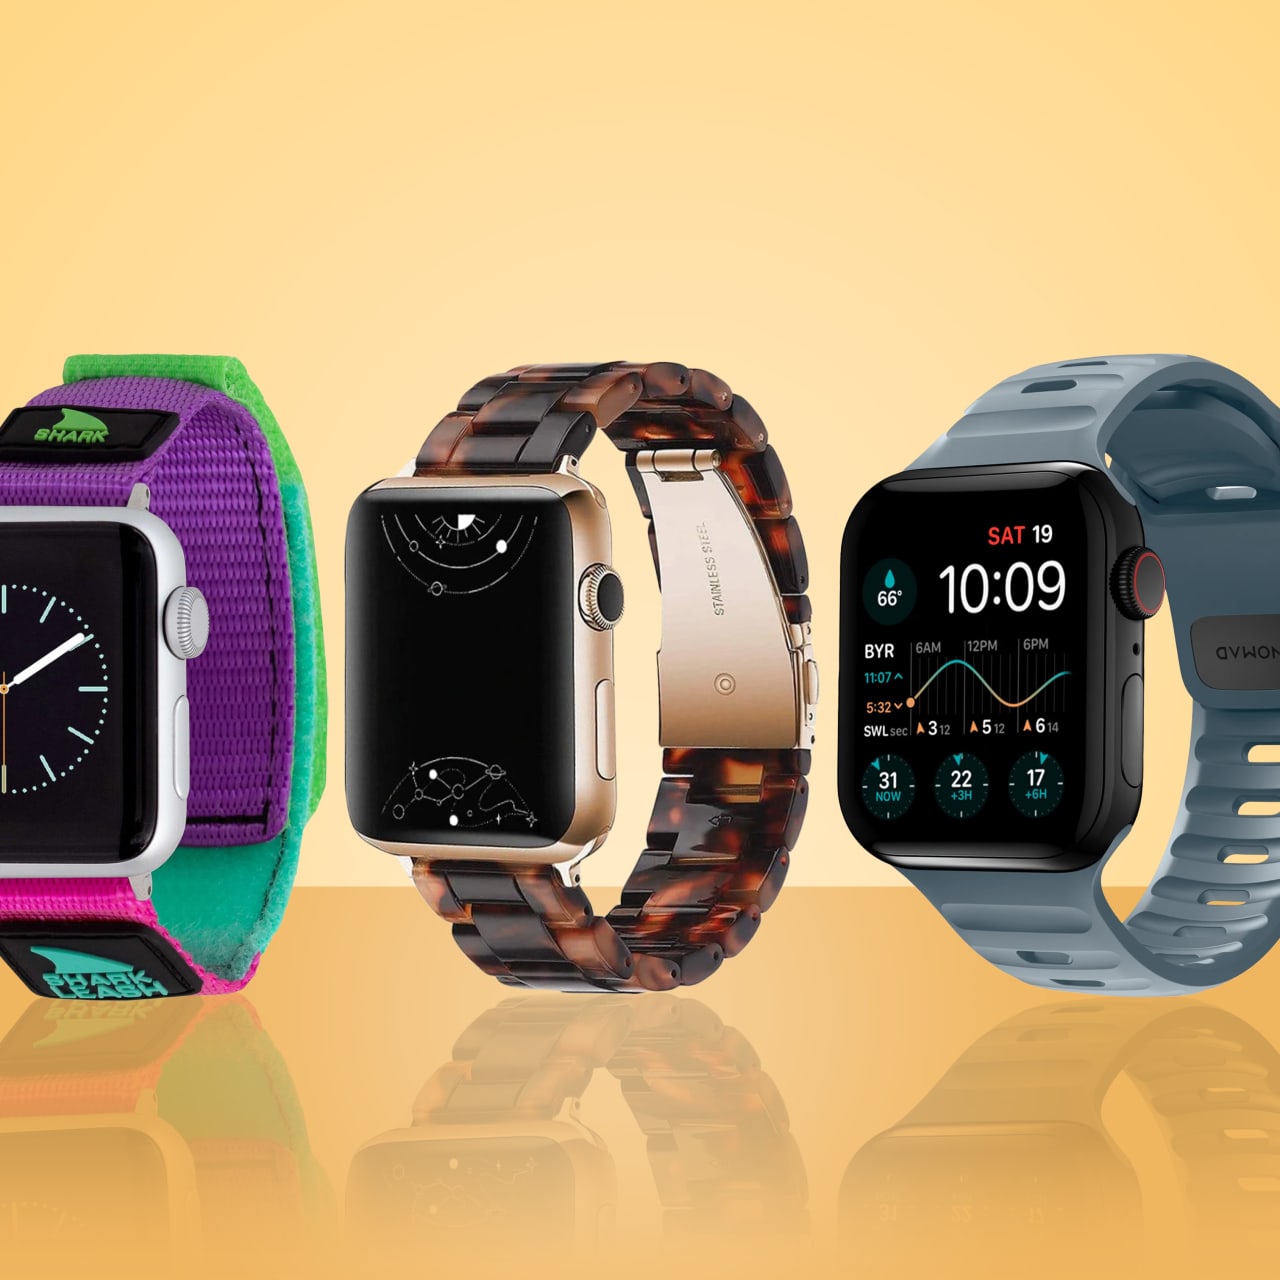 The Best Apple Watch Bands to Personalize Your Wrist - Buy Side from WSJ